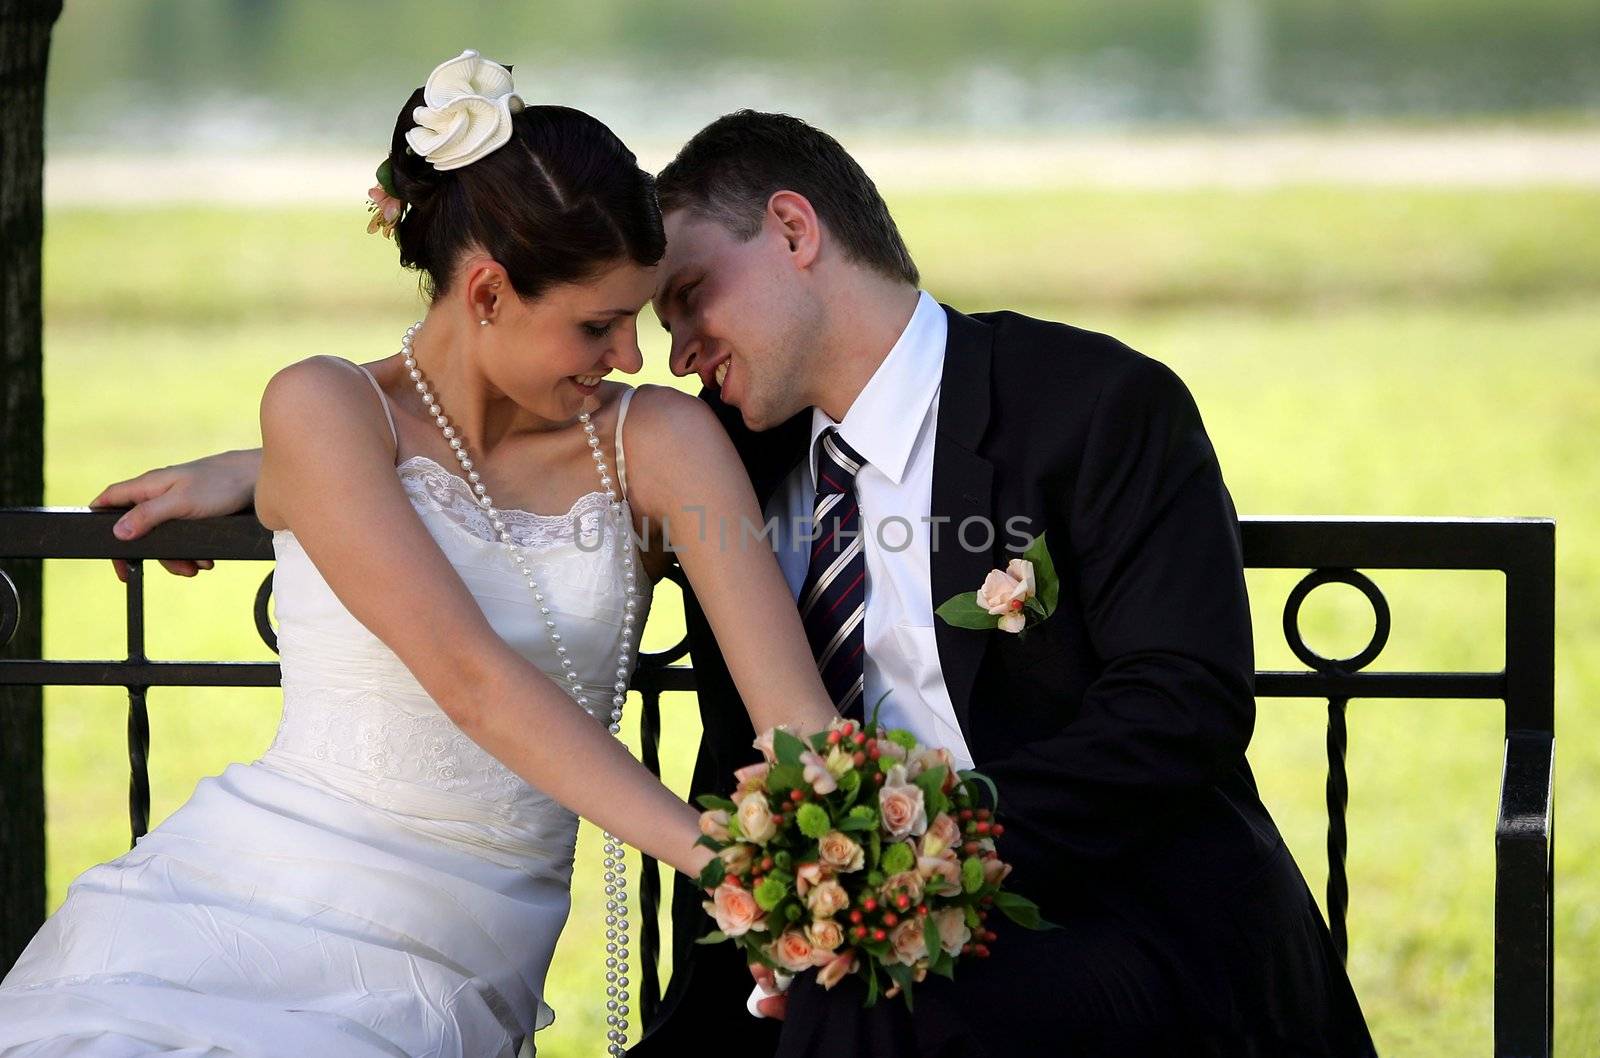 Newlywed couple sat on park bench romancing, tree and greenery in background.